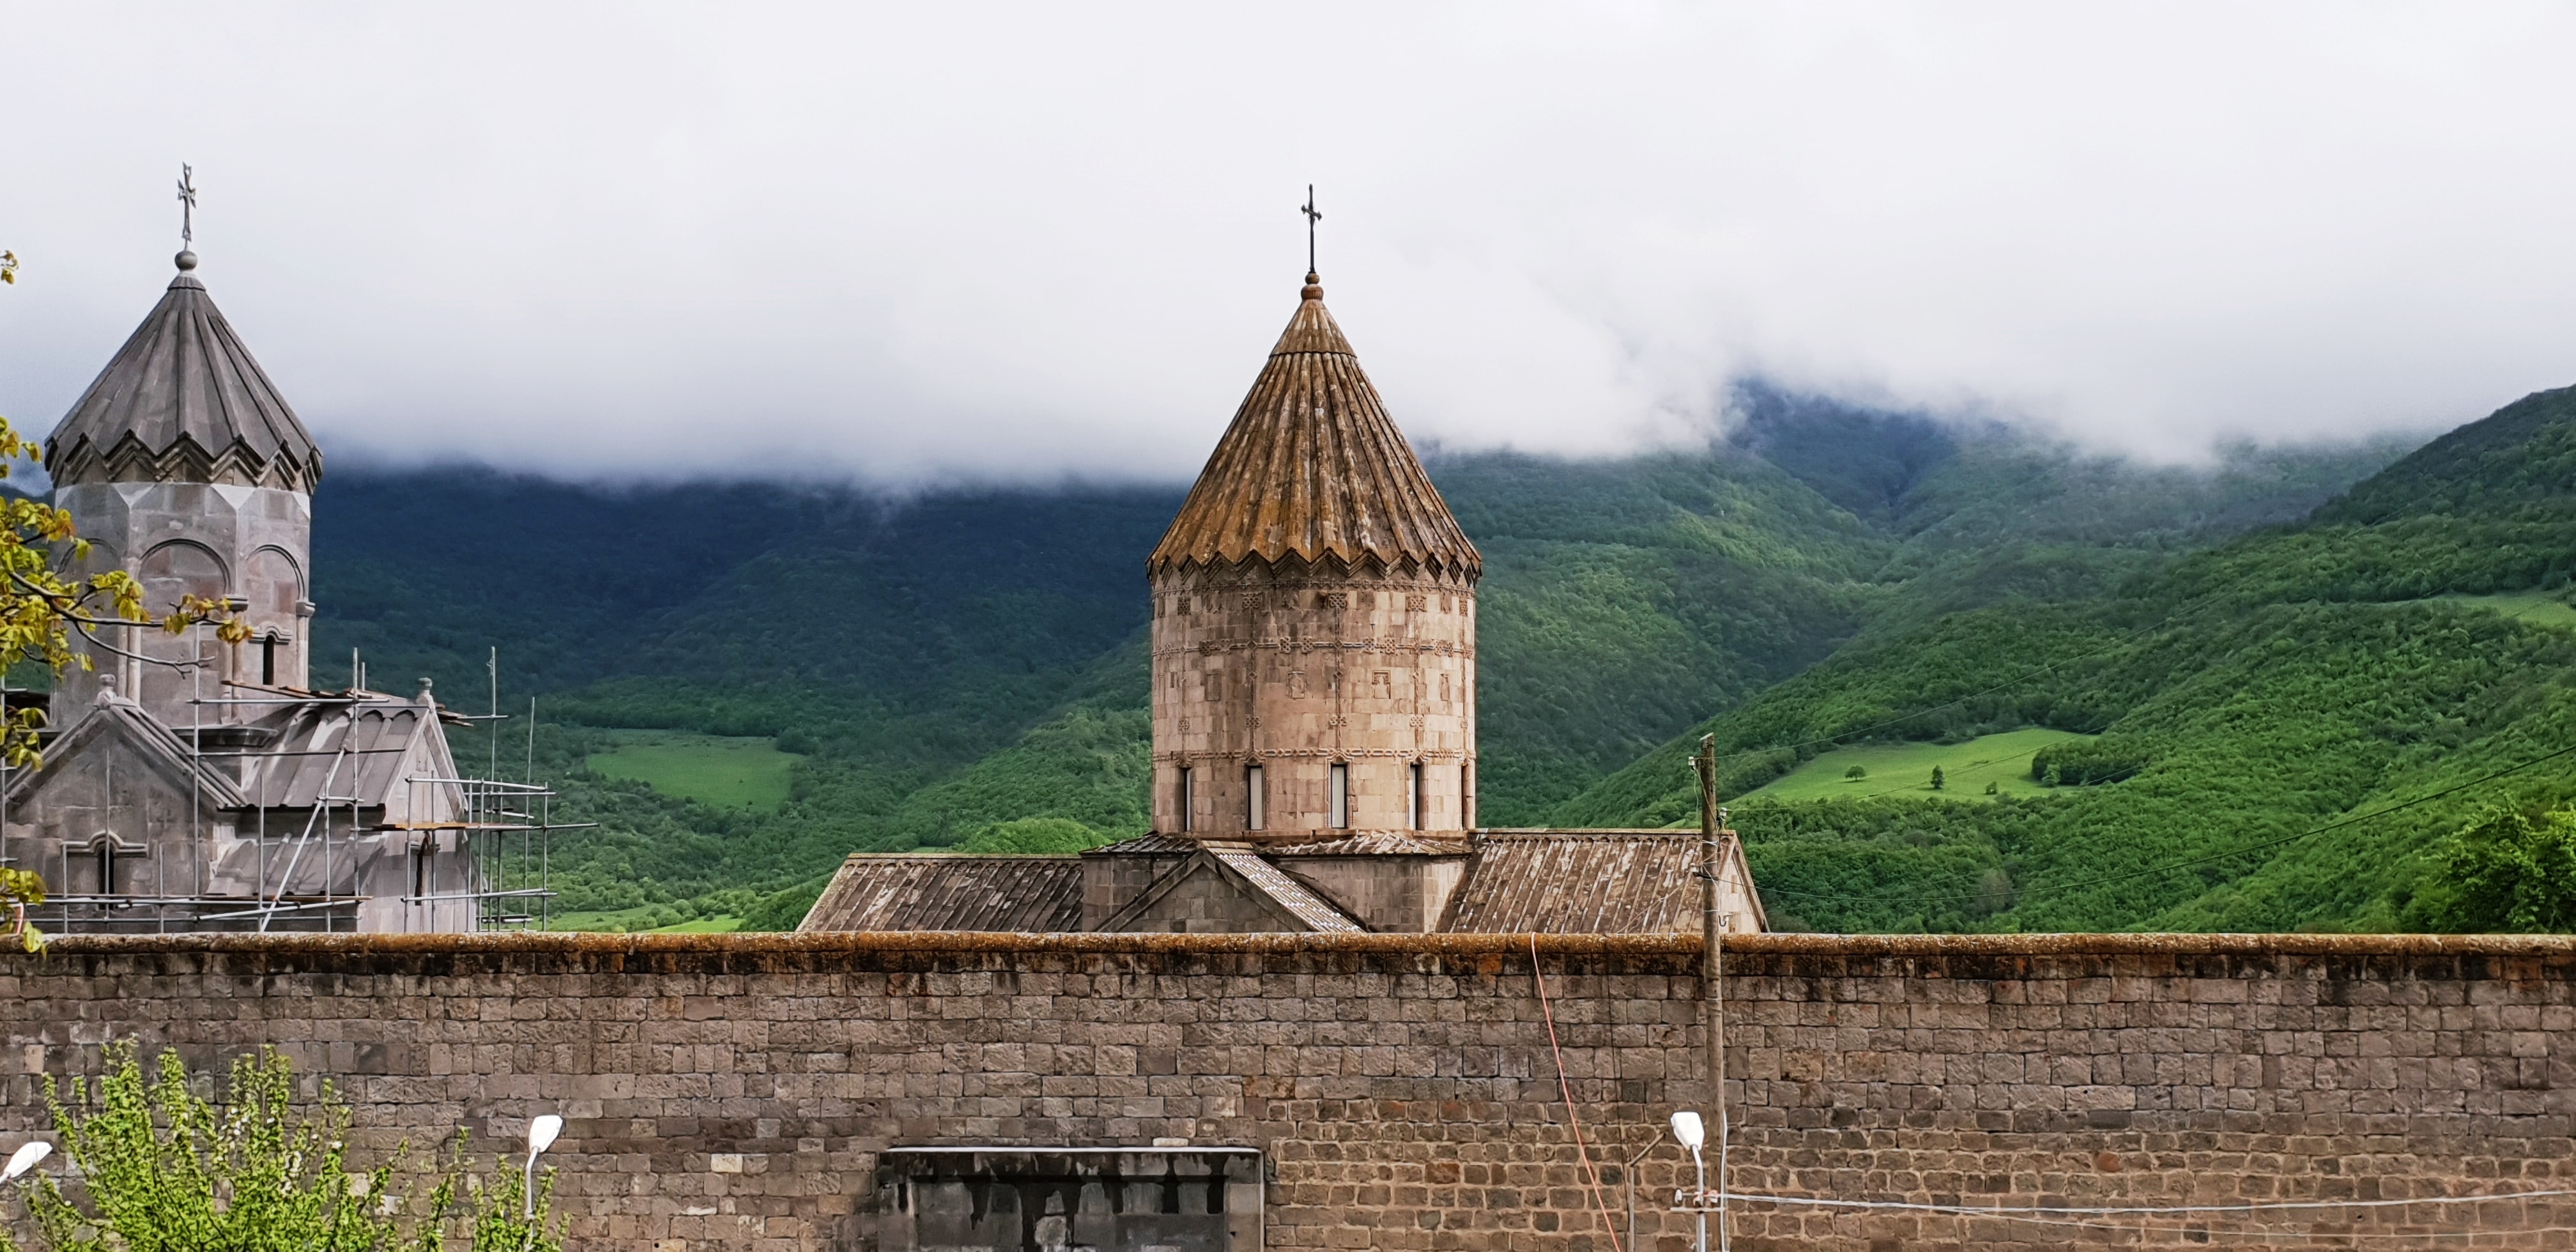 Surreal looking Tatev monastery when seen from the outside